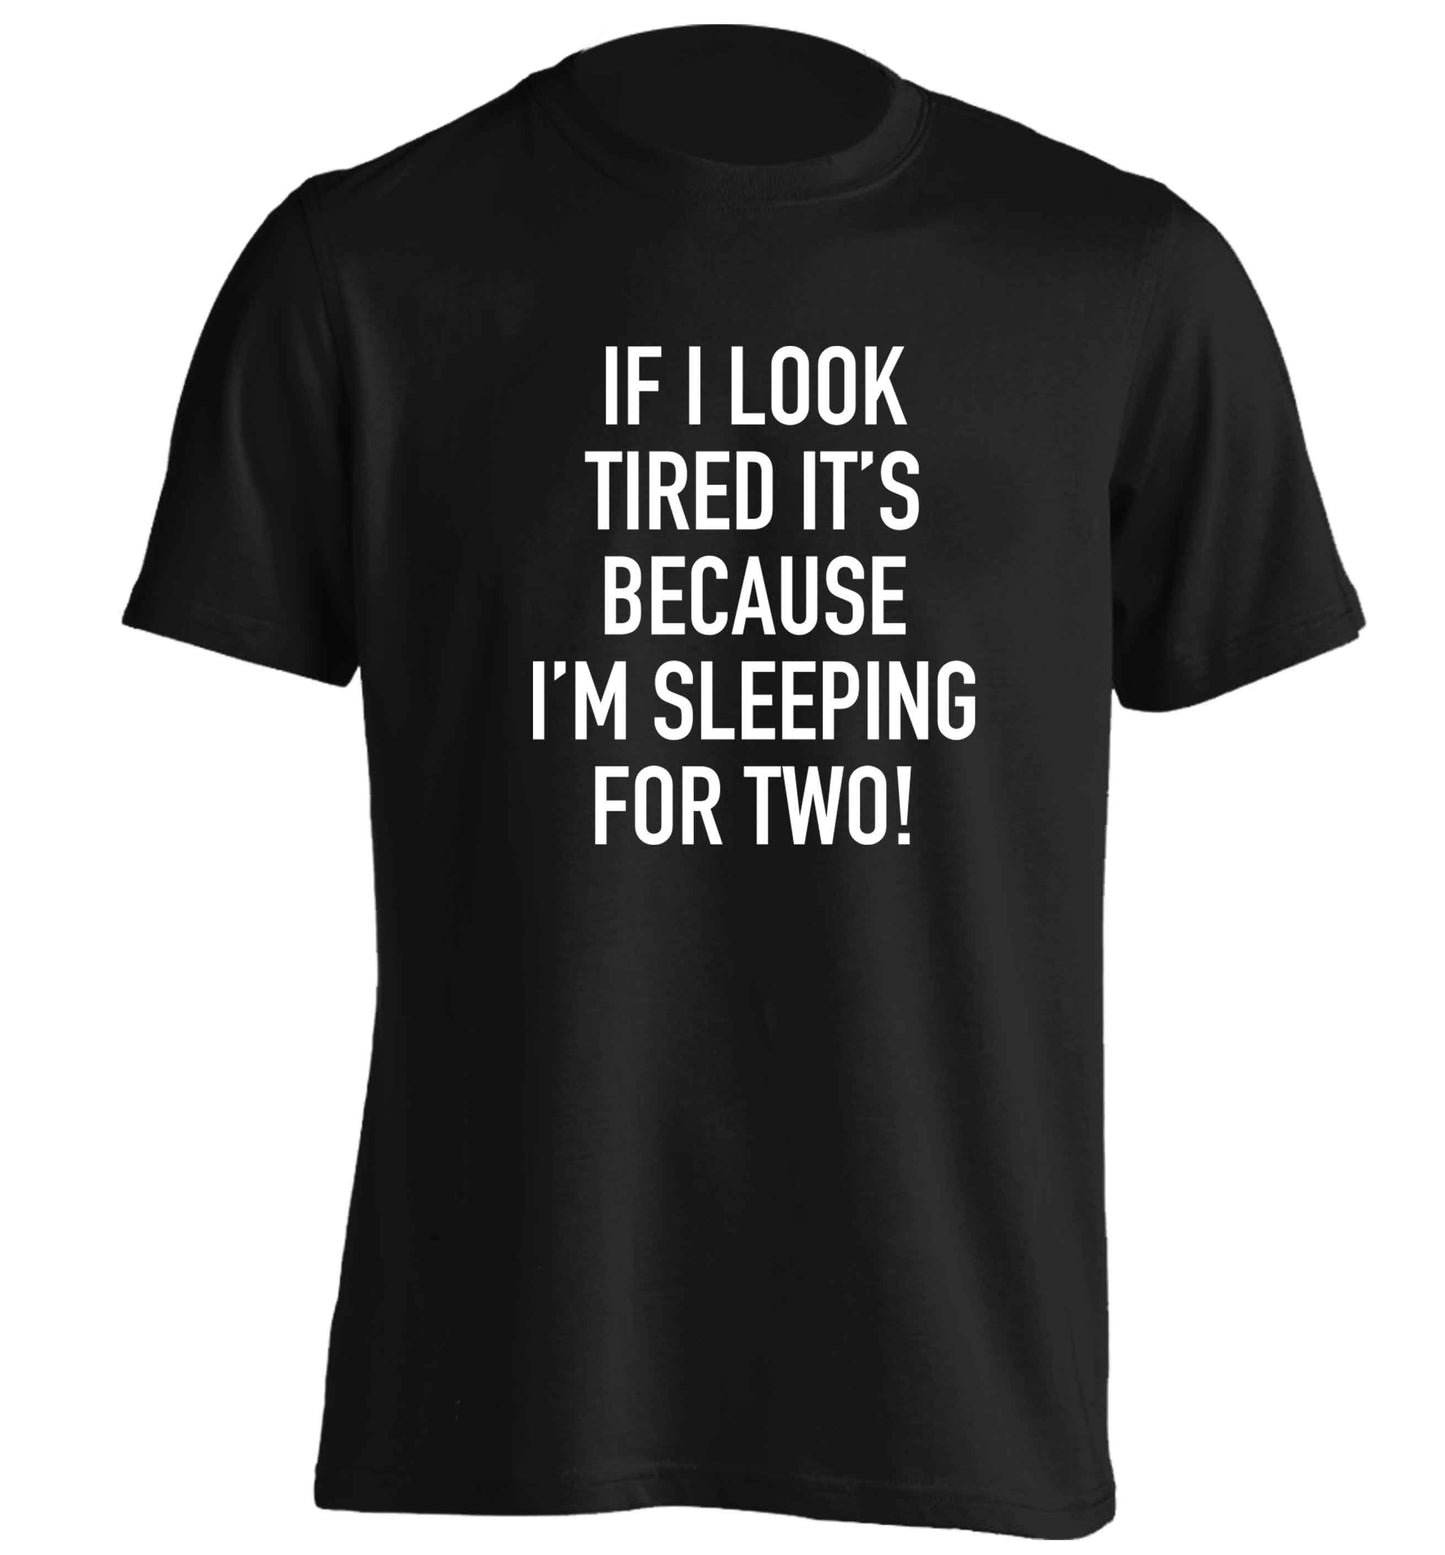 If I look tired it's because I'm sleeping for two adults unisex black Tshirt 2XL